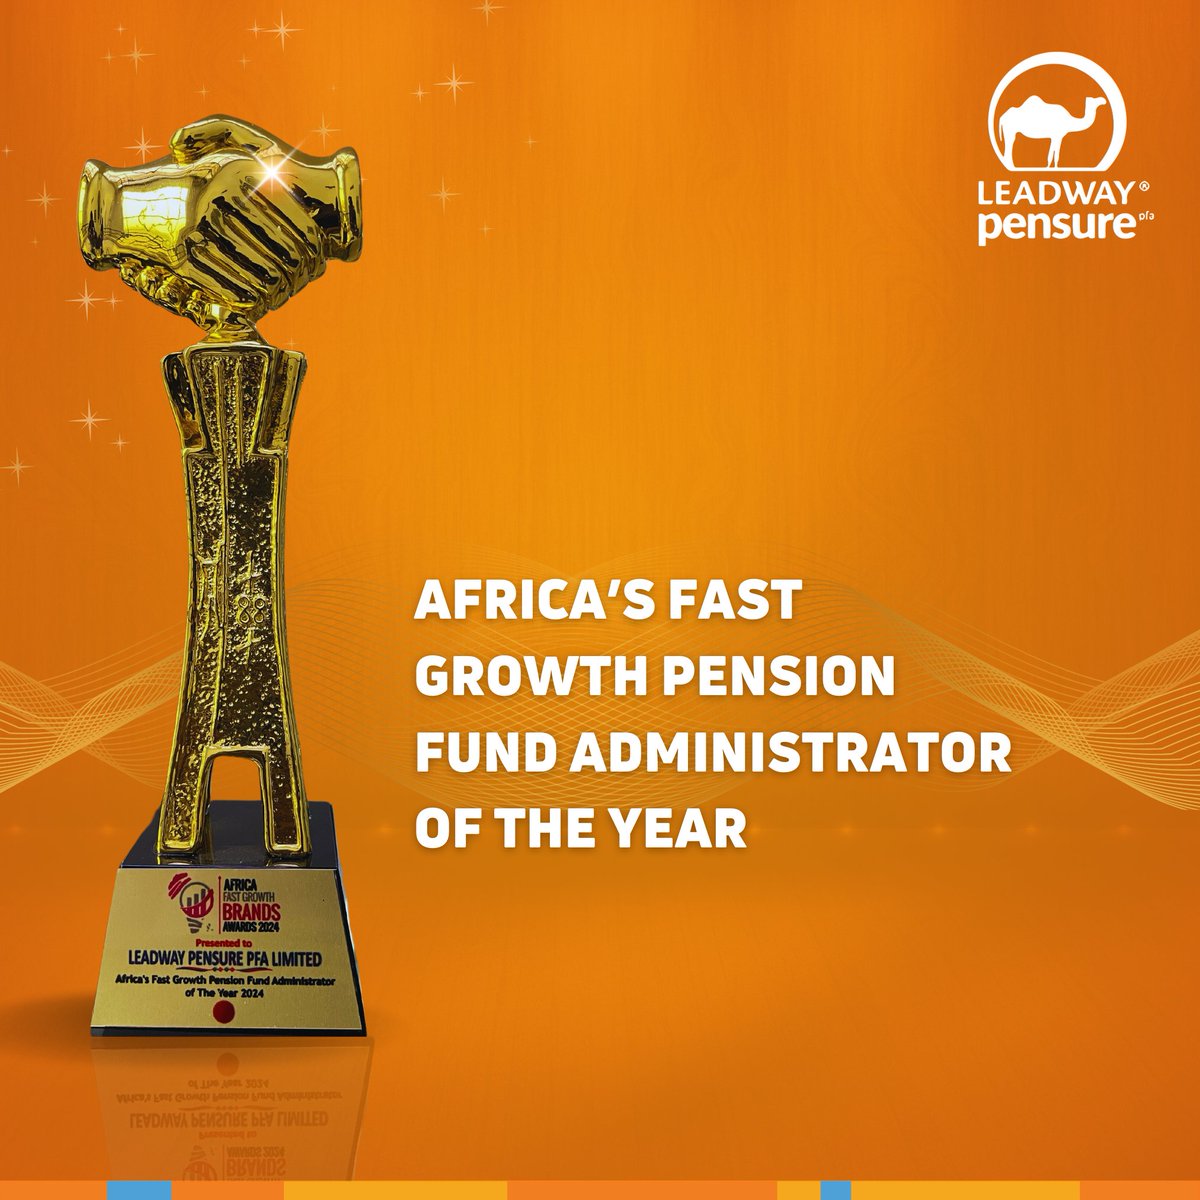 We are thrilled to be Africa's Fastest Growth Pension Fund Administrator!  

Huge thanks to YOU, our clients & team for fueling this journey. Cheers to continued success & serving you even better!

#leadwaypensurepfa #awardrecognition #Leadway #liveyourbestlife